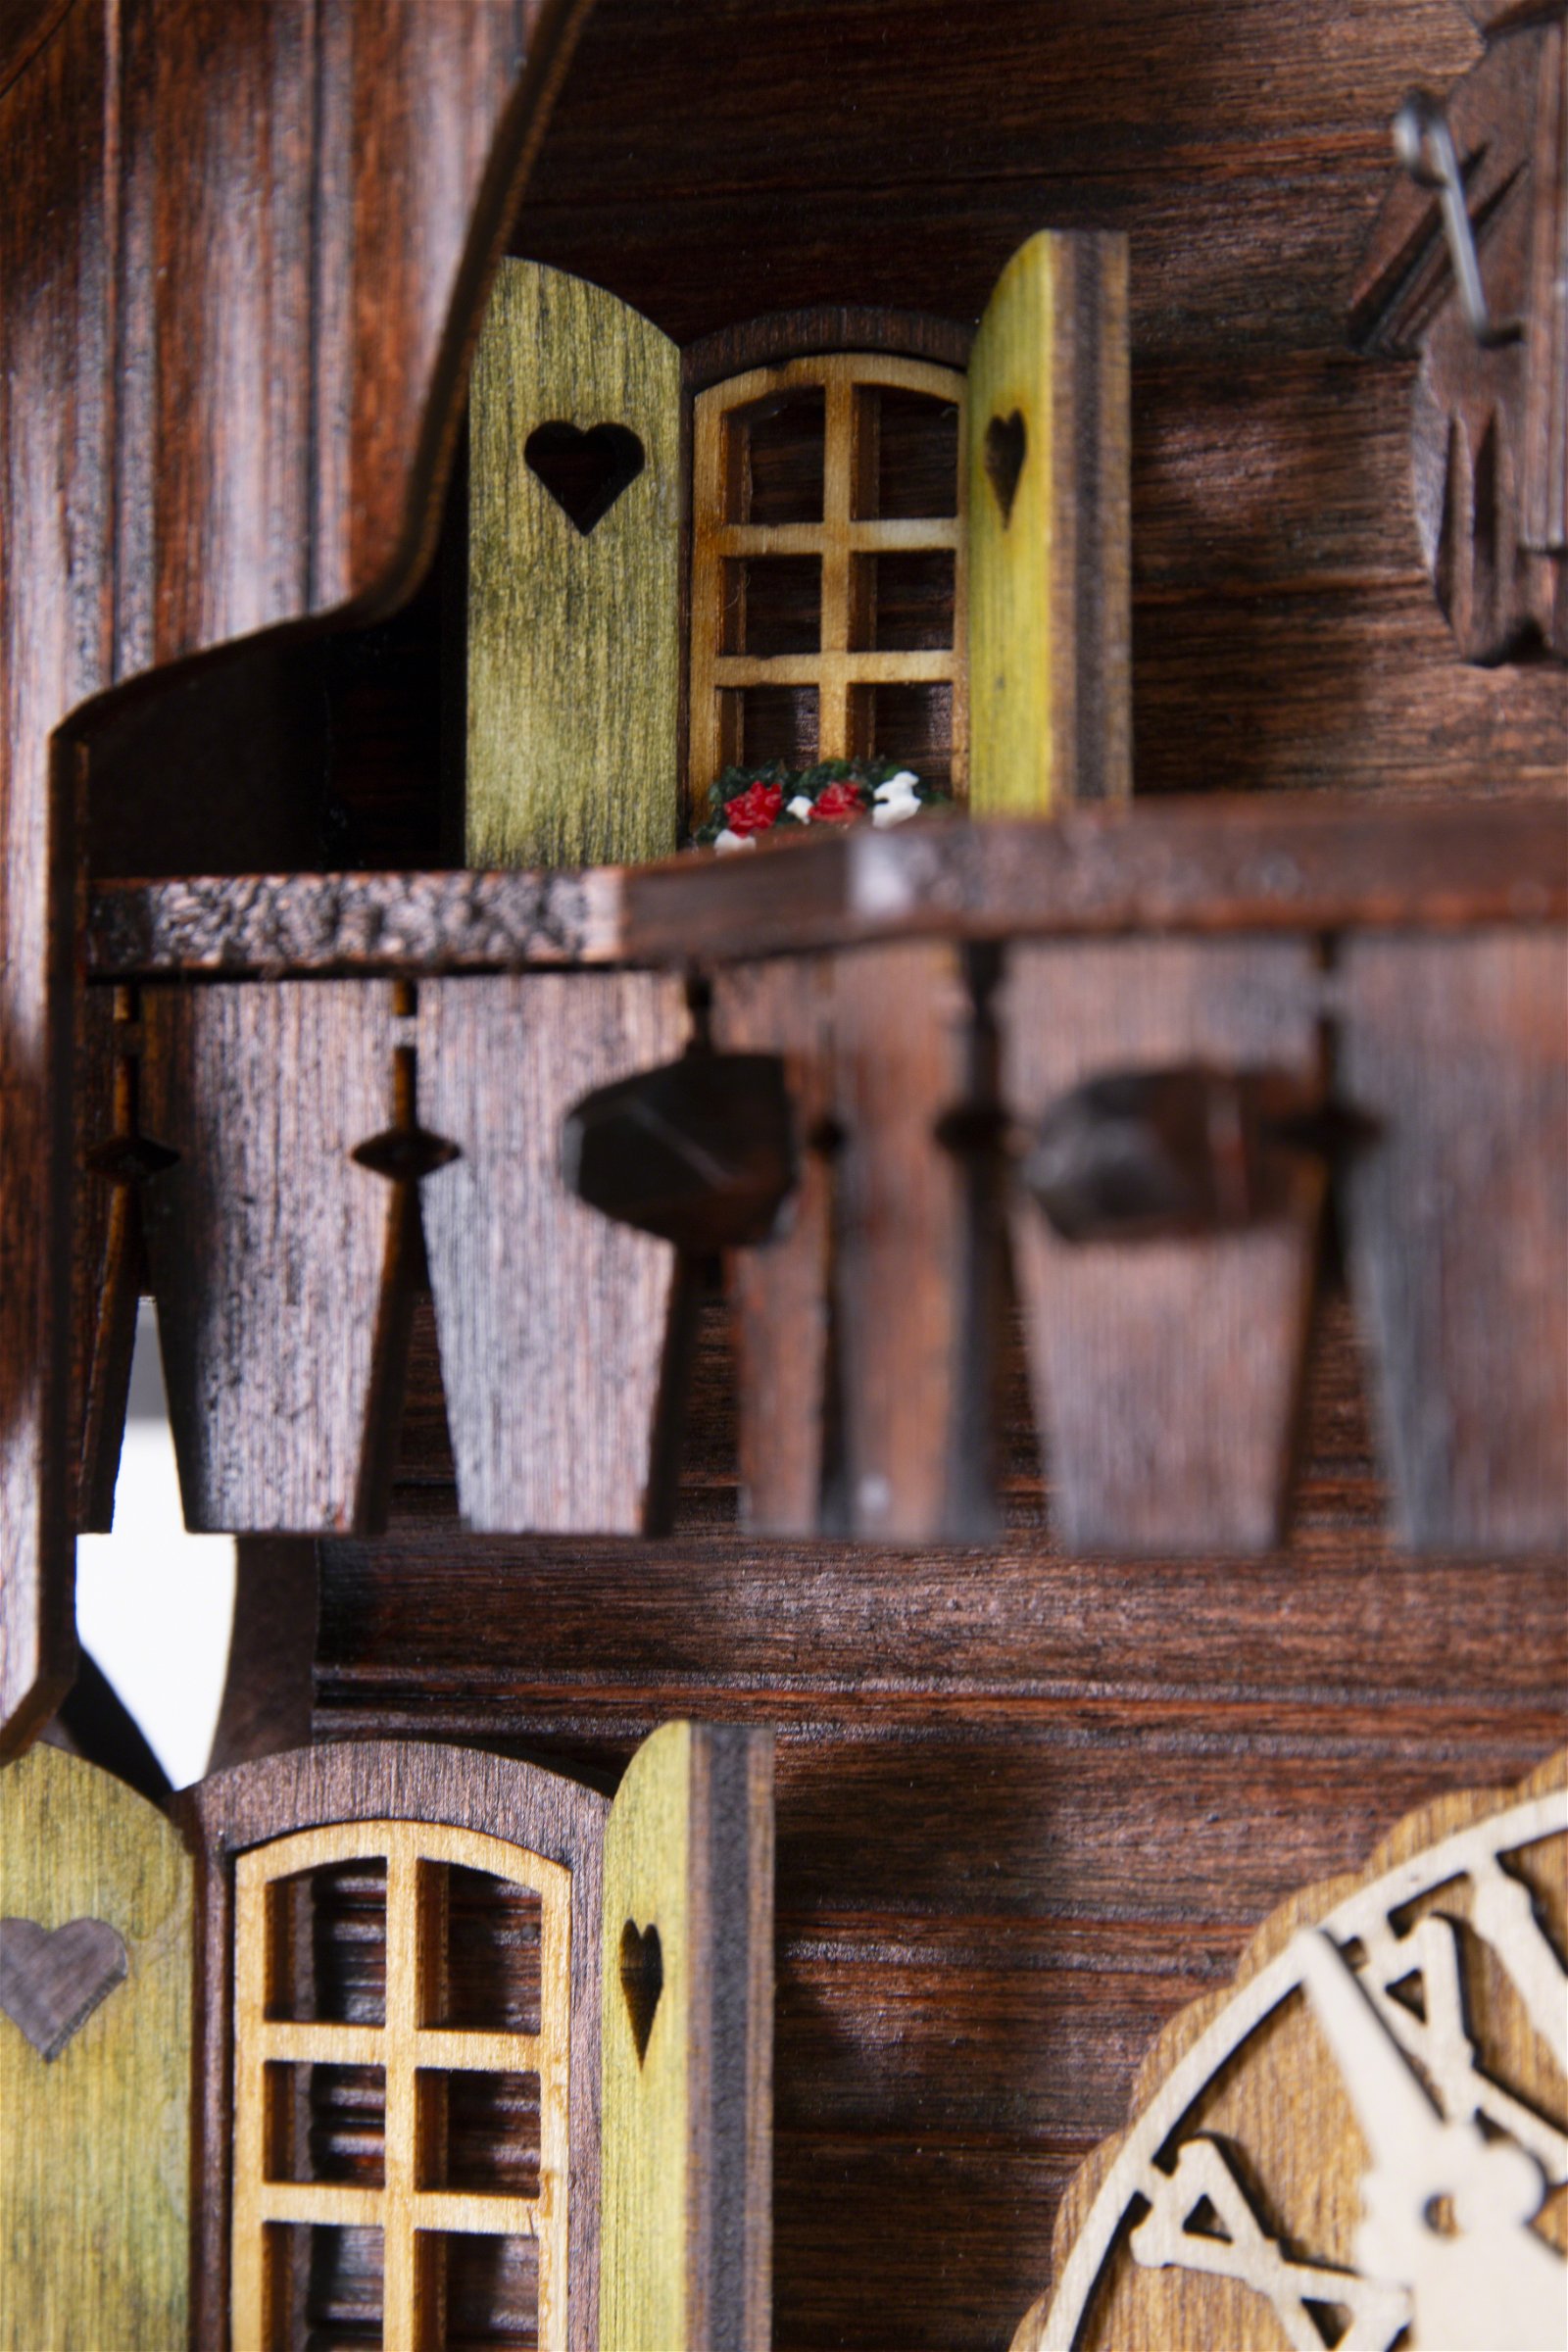 Cuckoo Clock 1-day-movement Chalet-Style 32cm by Hekas